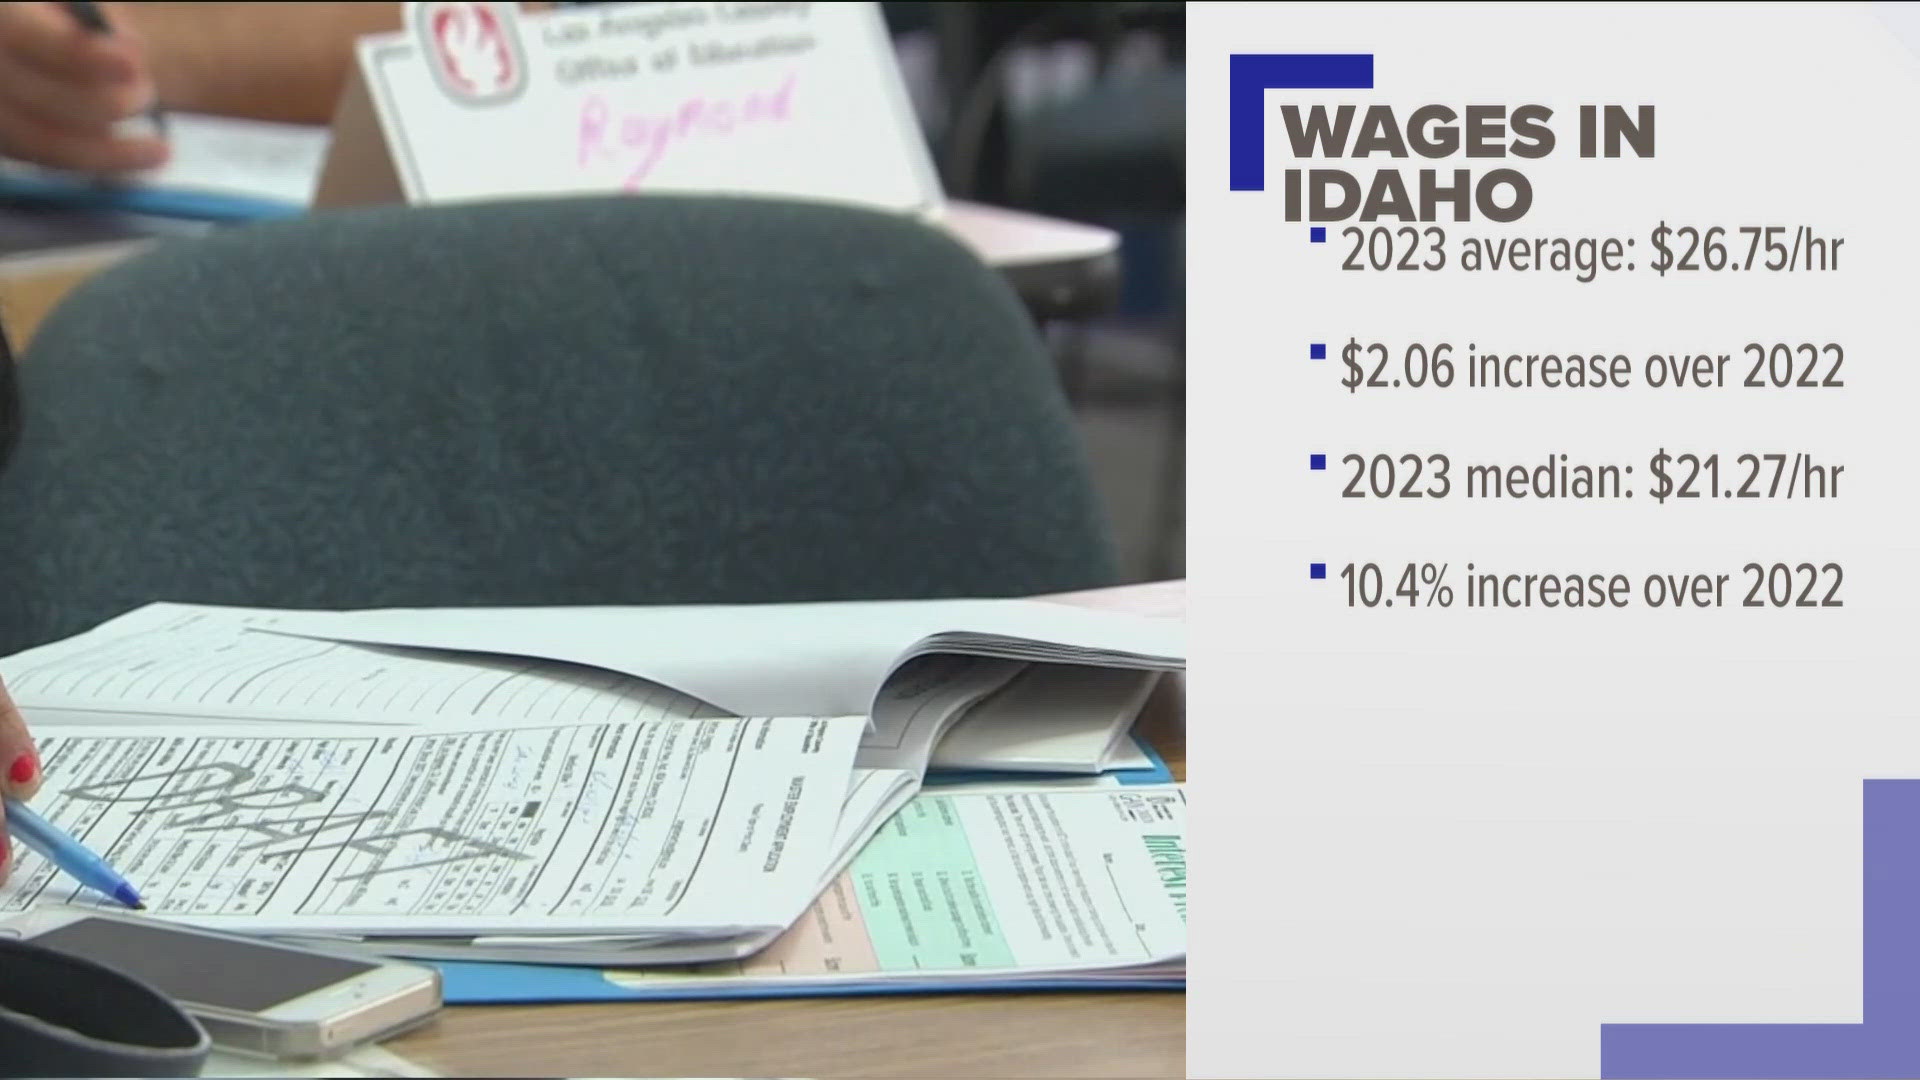 According to the Idaho Department of Labor, the average hourly wage in 2023 was $26.75, an increase of $2.06 compared to 2022.